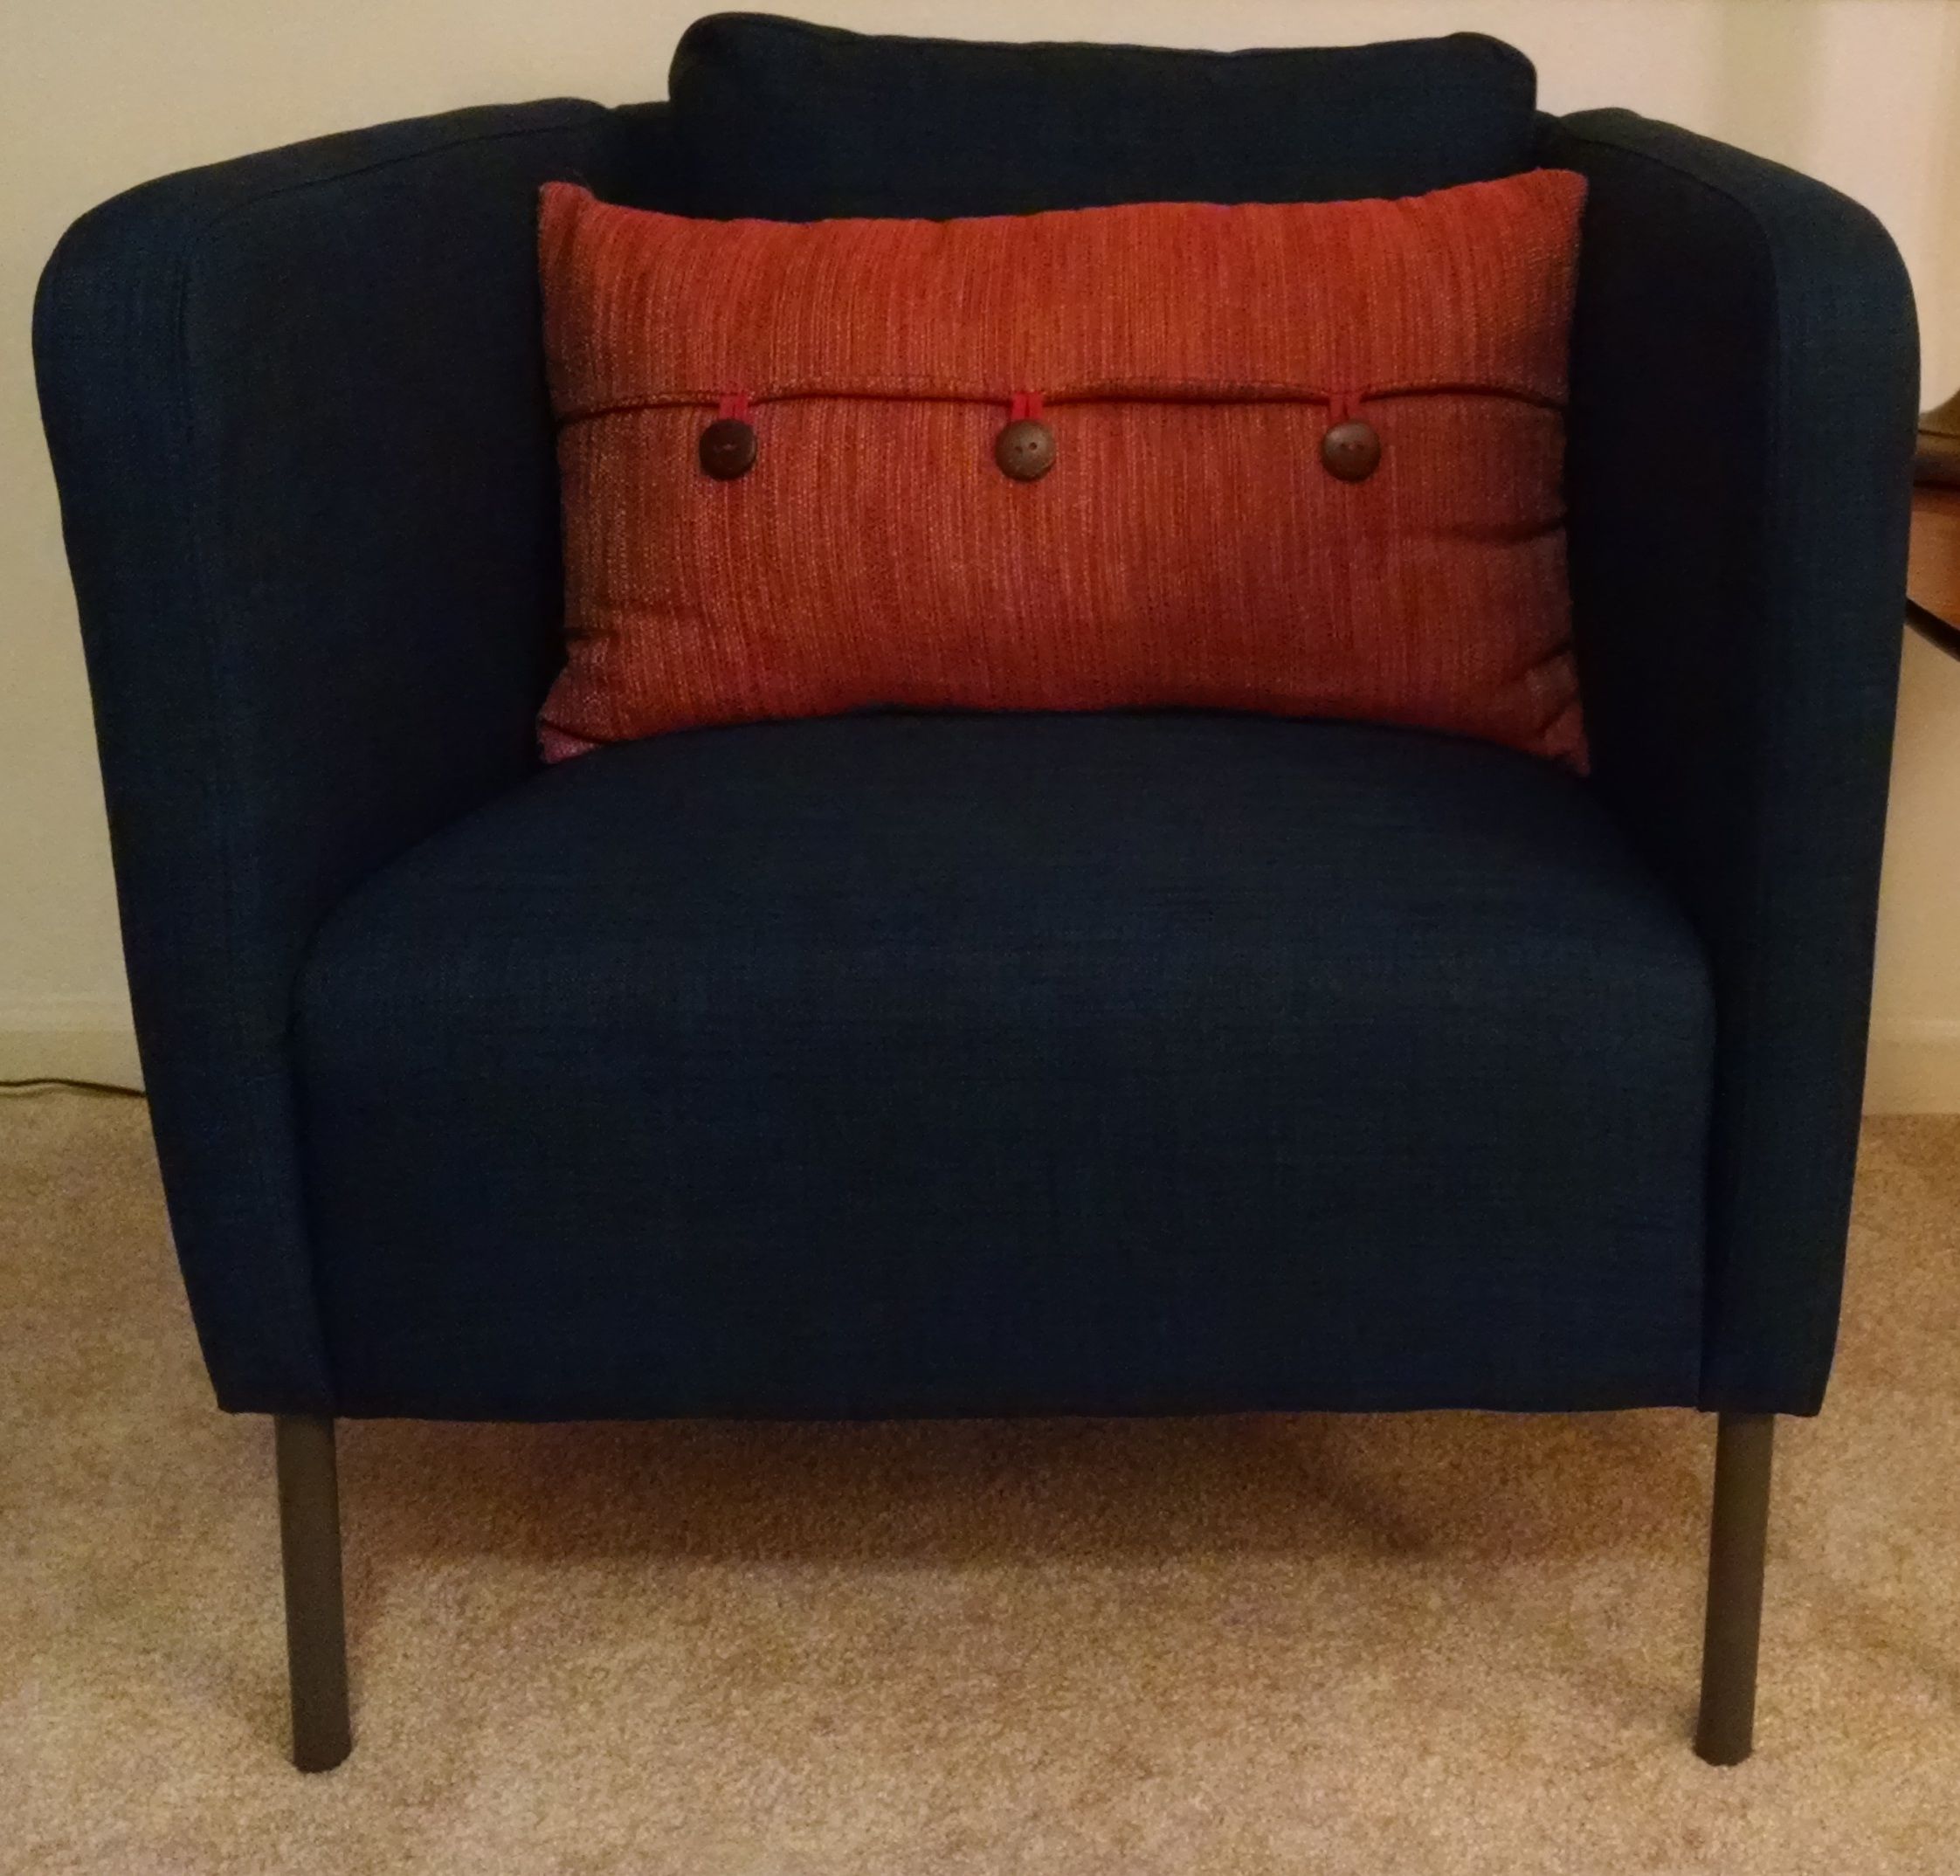 Replace Ikea Legs For A Chair, Couch, And More – Alan Pringle Throughout Ikea Sofa Chairs (View 9 of 25)